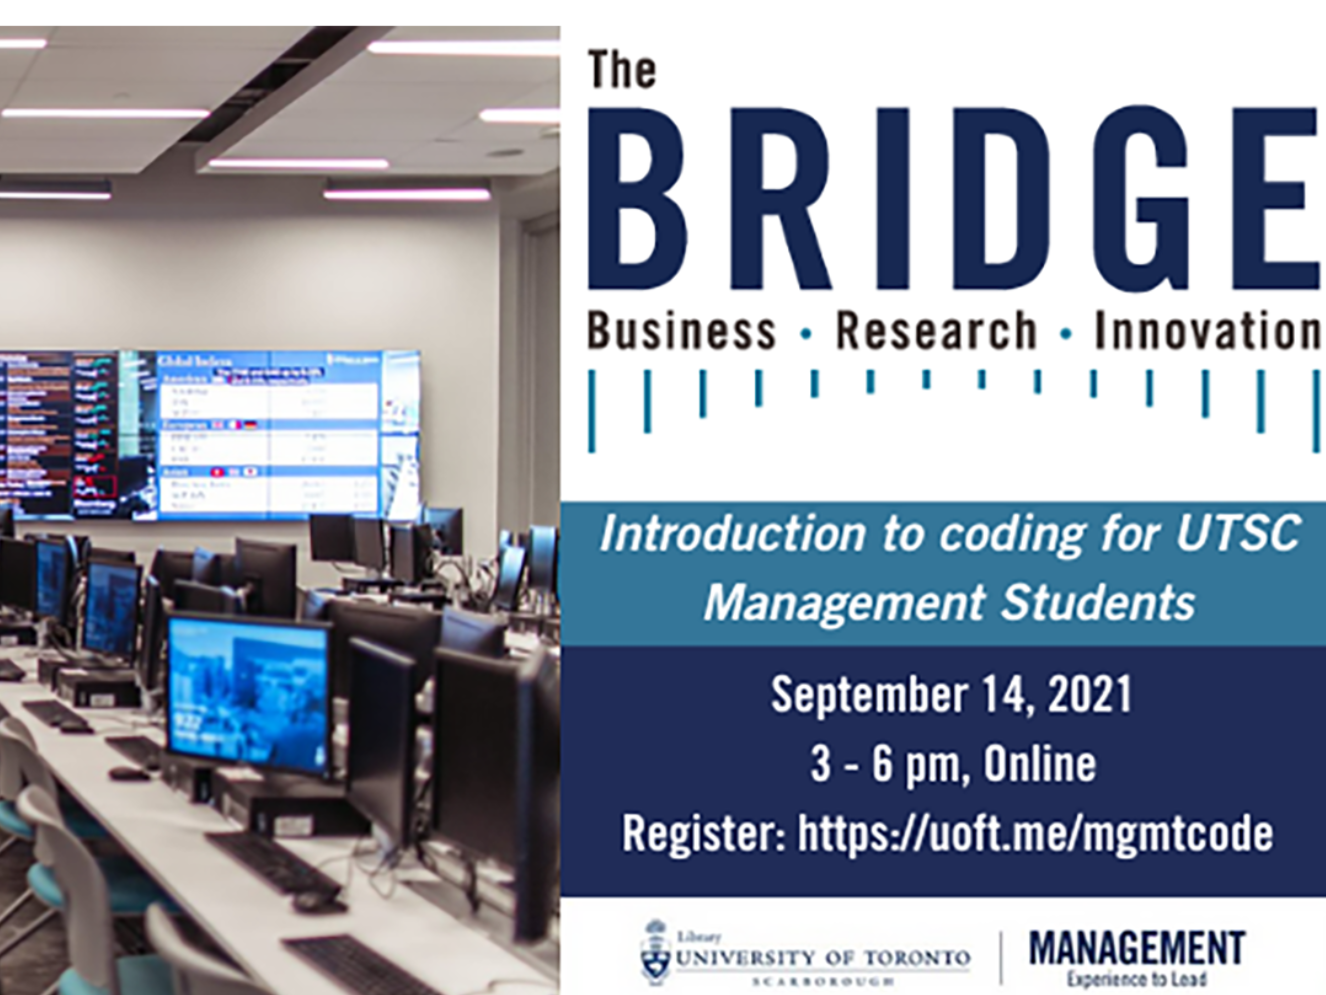 Introduction to Coding for Management Students